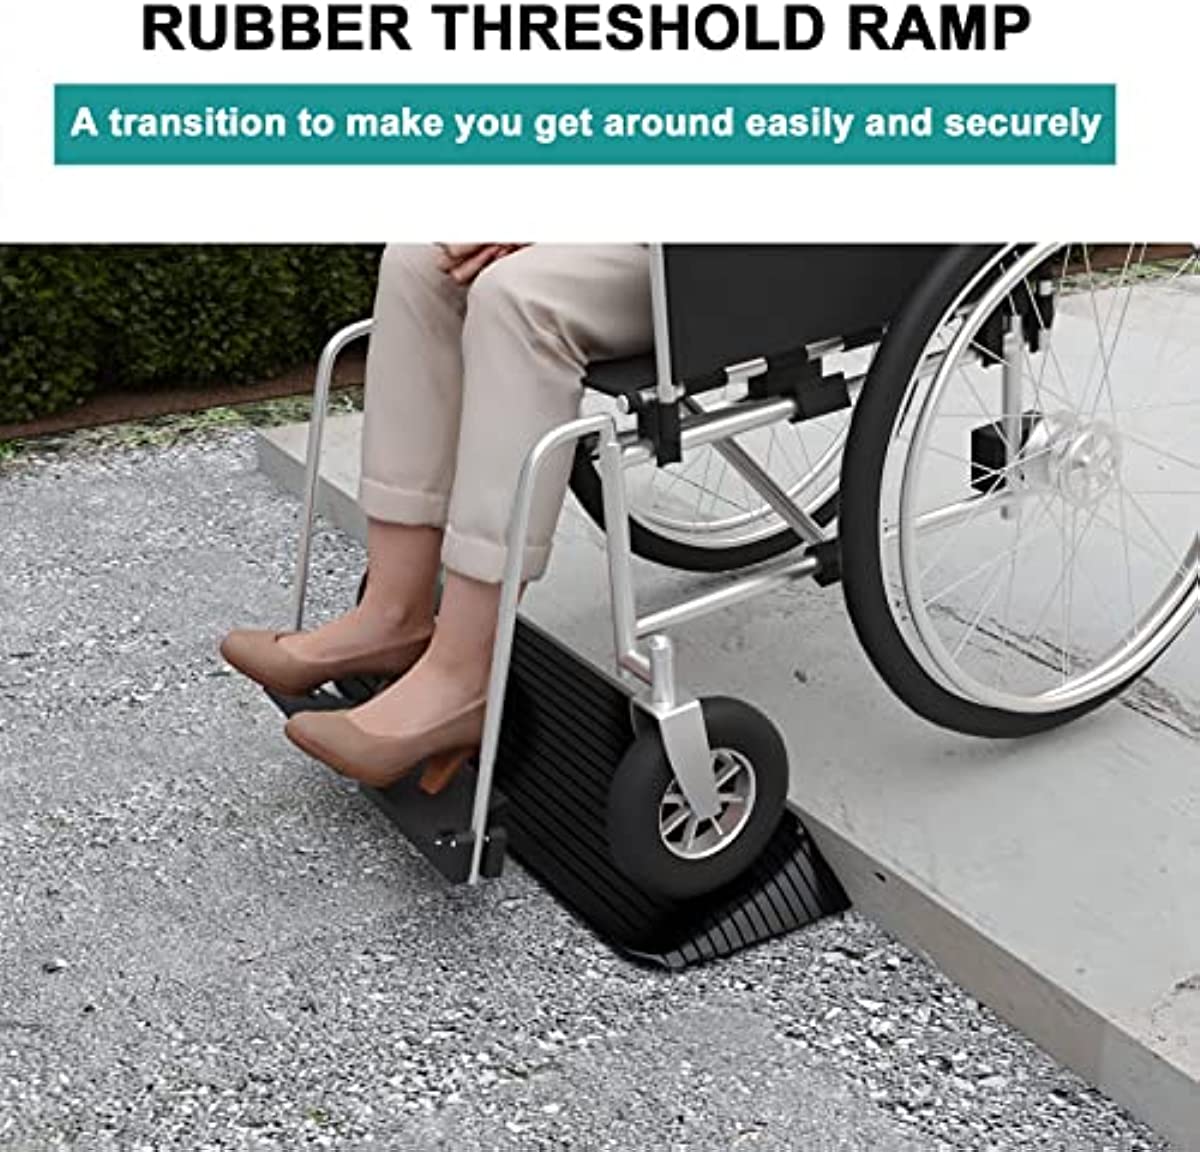 MEETWARM Threshold Ramps for Doorways Heavy Duty Wheelchair Ramps - 1.5\" Rise Non-Skid Solid Rubber Scooter Threshold Ramp, 1 Pack